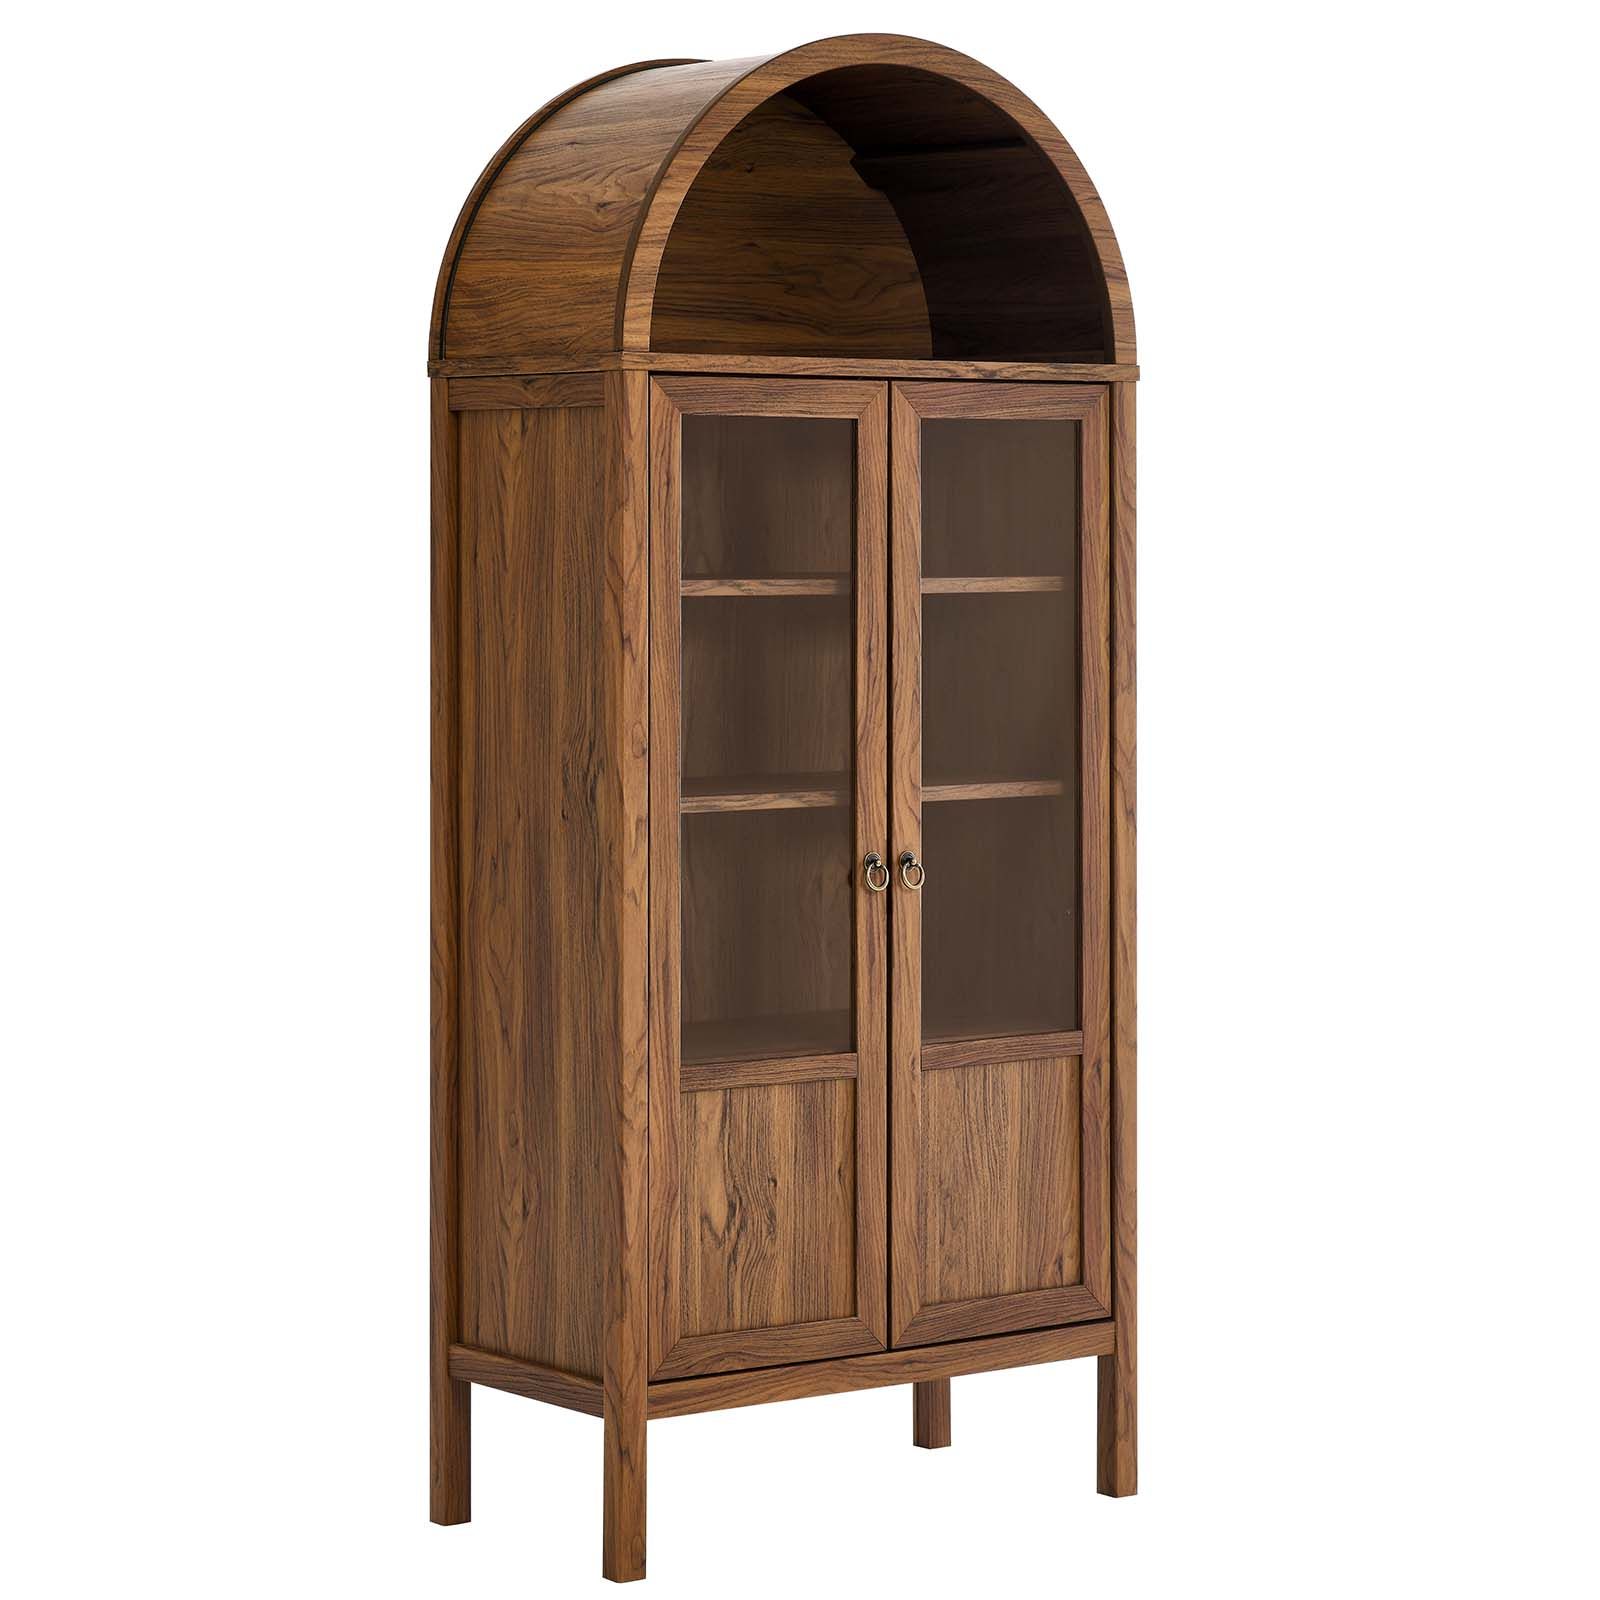 Modway Tessa Wood Tall Storage Display Cabinet with Rounded Arched Top in Walnut | Walmart (US)